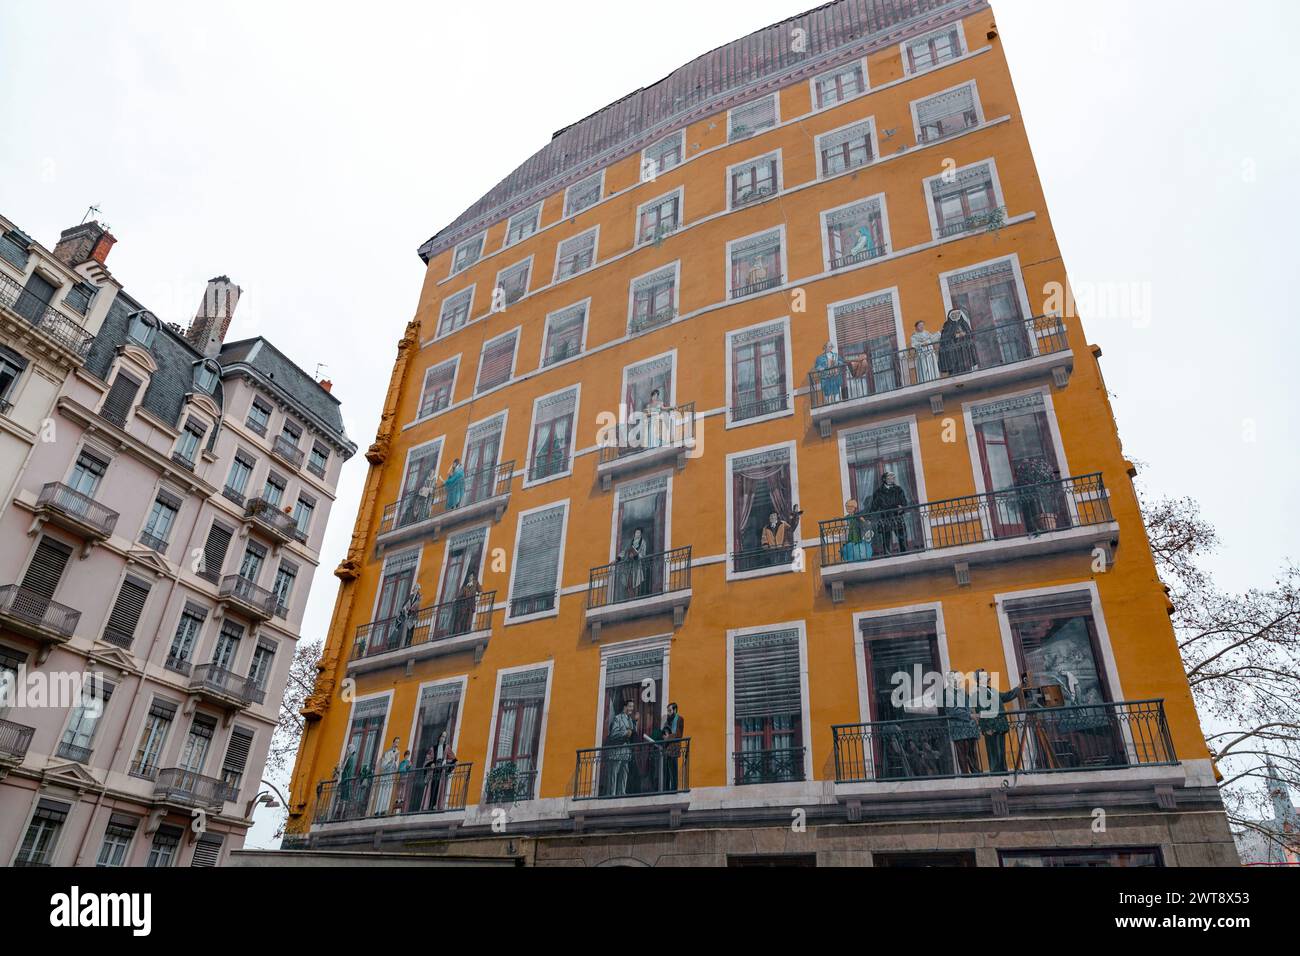 Lyon, France - January 26, 2022: La Fresque des Lyonnais is an 800m2 mural, representing 24 historical and 6 contemporary figures from Lyon, produced Stock Photo